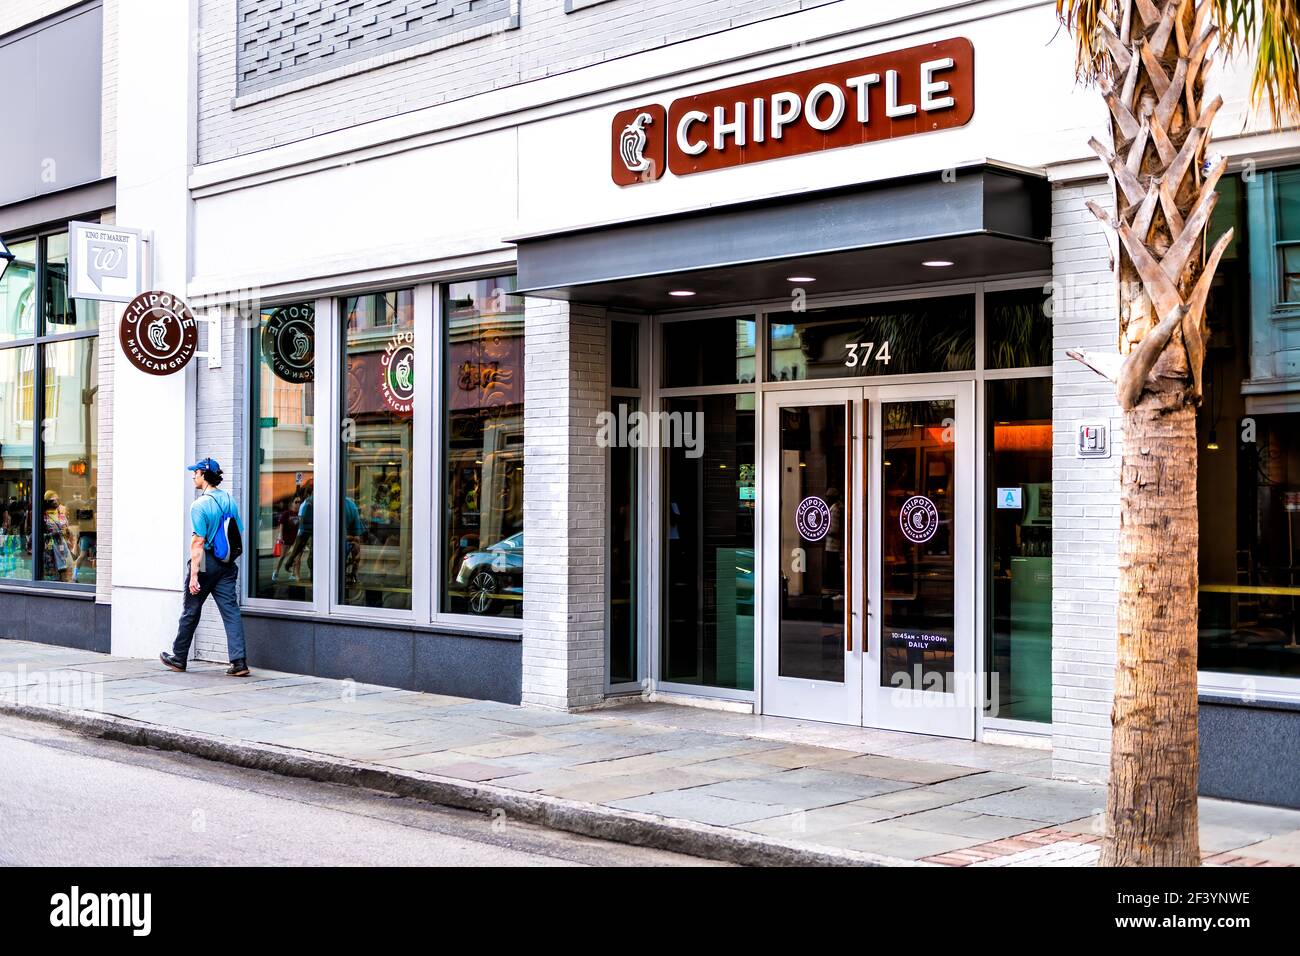 Charleston, USA - May 12, 2018: Chipotle restaurant sign in historic old town of South Carolina French quarter on King street with people Stock Photo